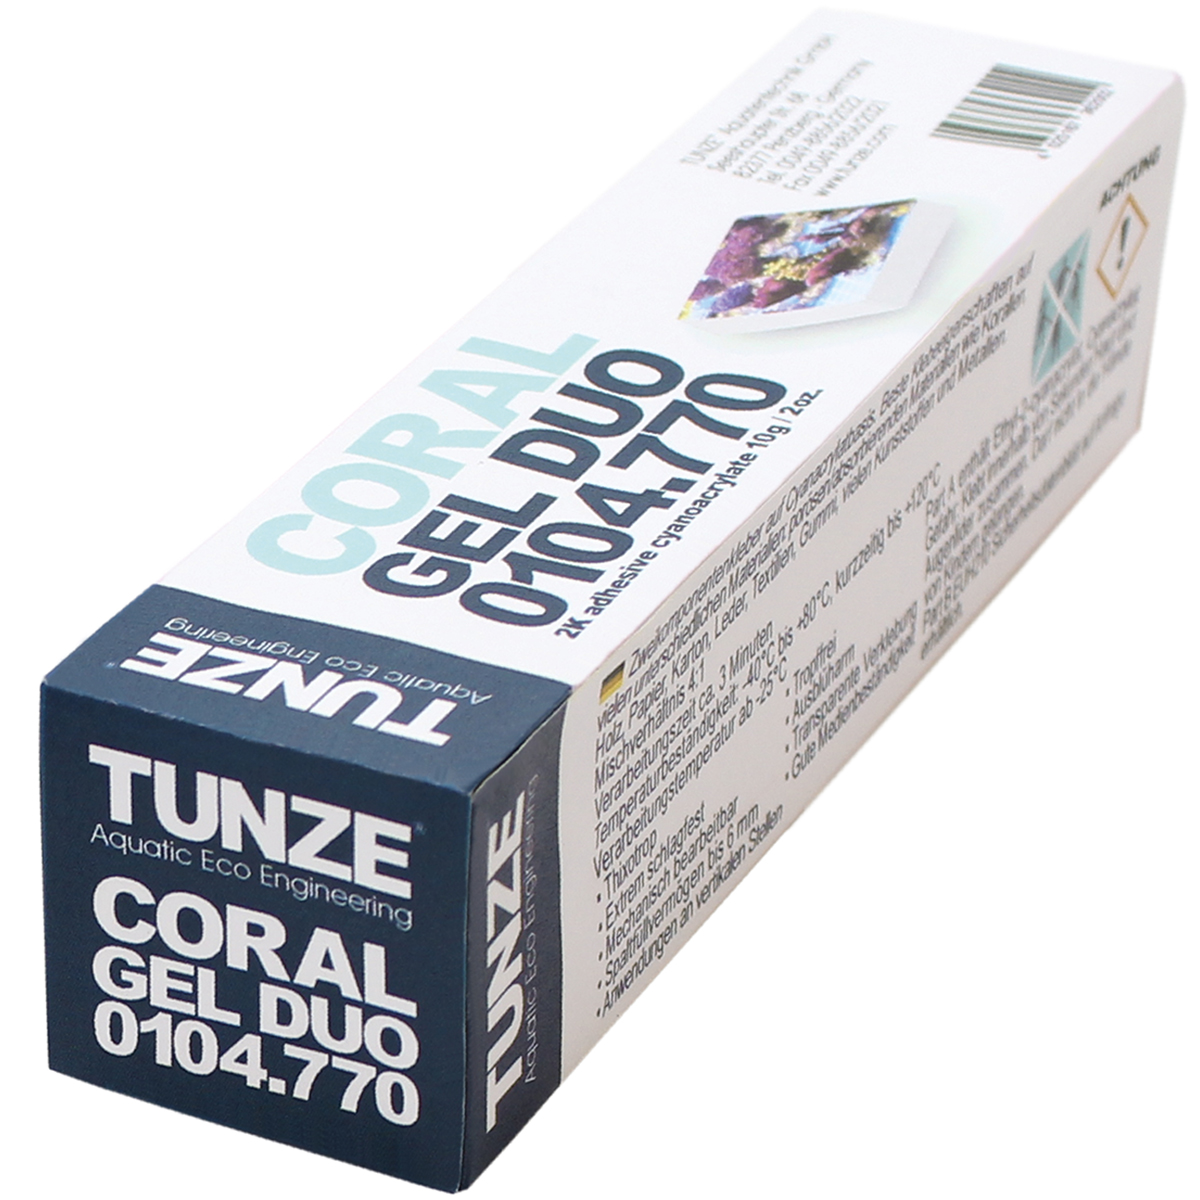 Coral Gel duo, 10g TUNZE 0104.770